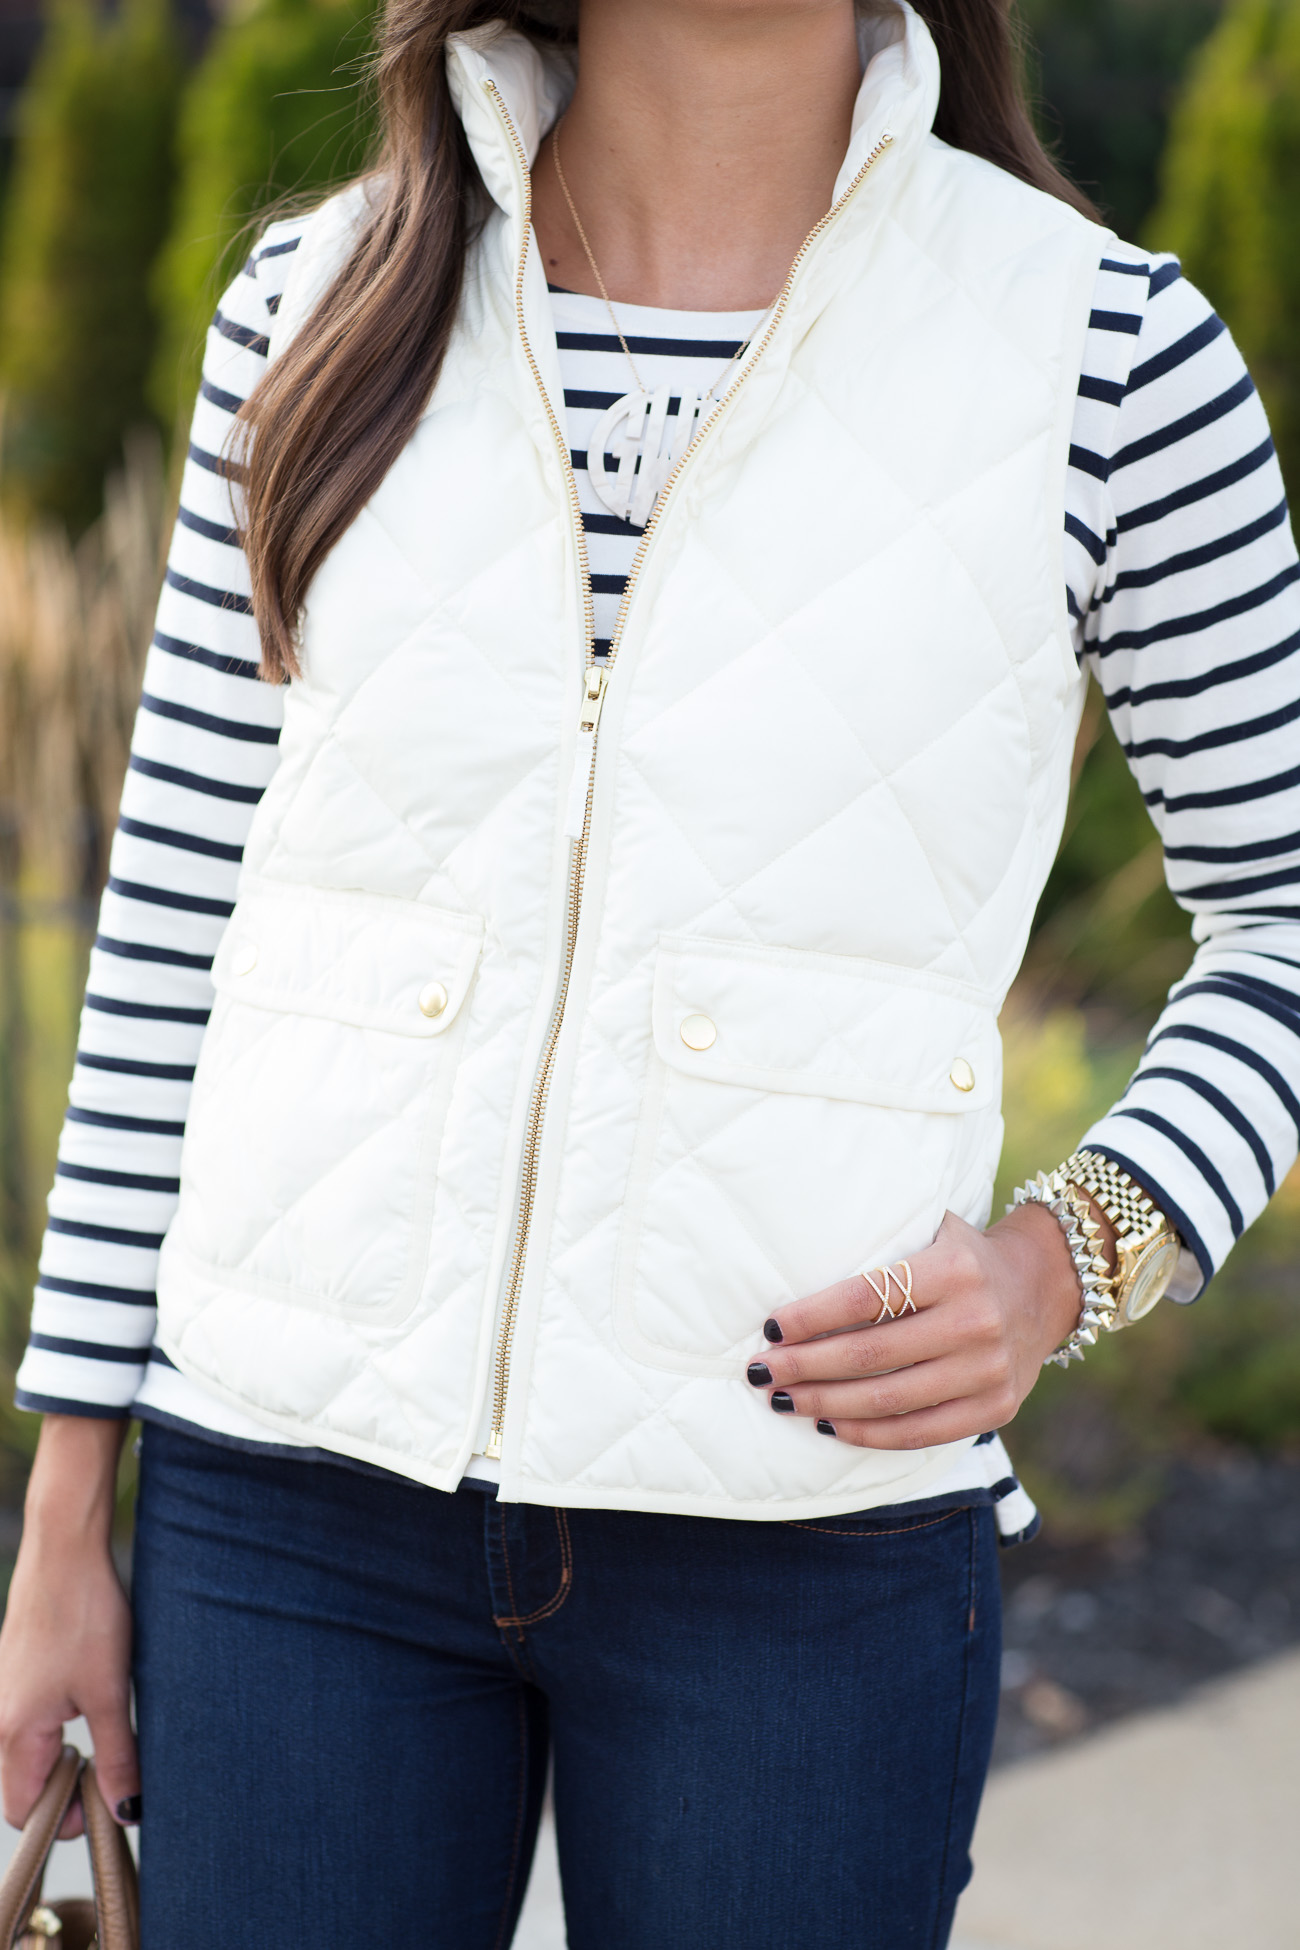 fall outfit ideas, quilted vest, j.crew excursion vest, navy stripe tee, extra large acrylic monogram necklace, ivory excursion vest, ivory puffer vest, fall style, fall fashion, fall style inspiration, a southern drawl fall outfits, cute fall outfits, preppy fall outfits, southern fashion blogger // grace wainwright a southern drawl